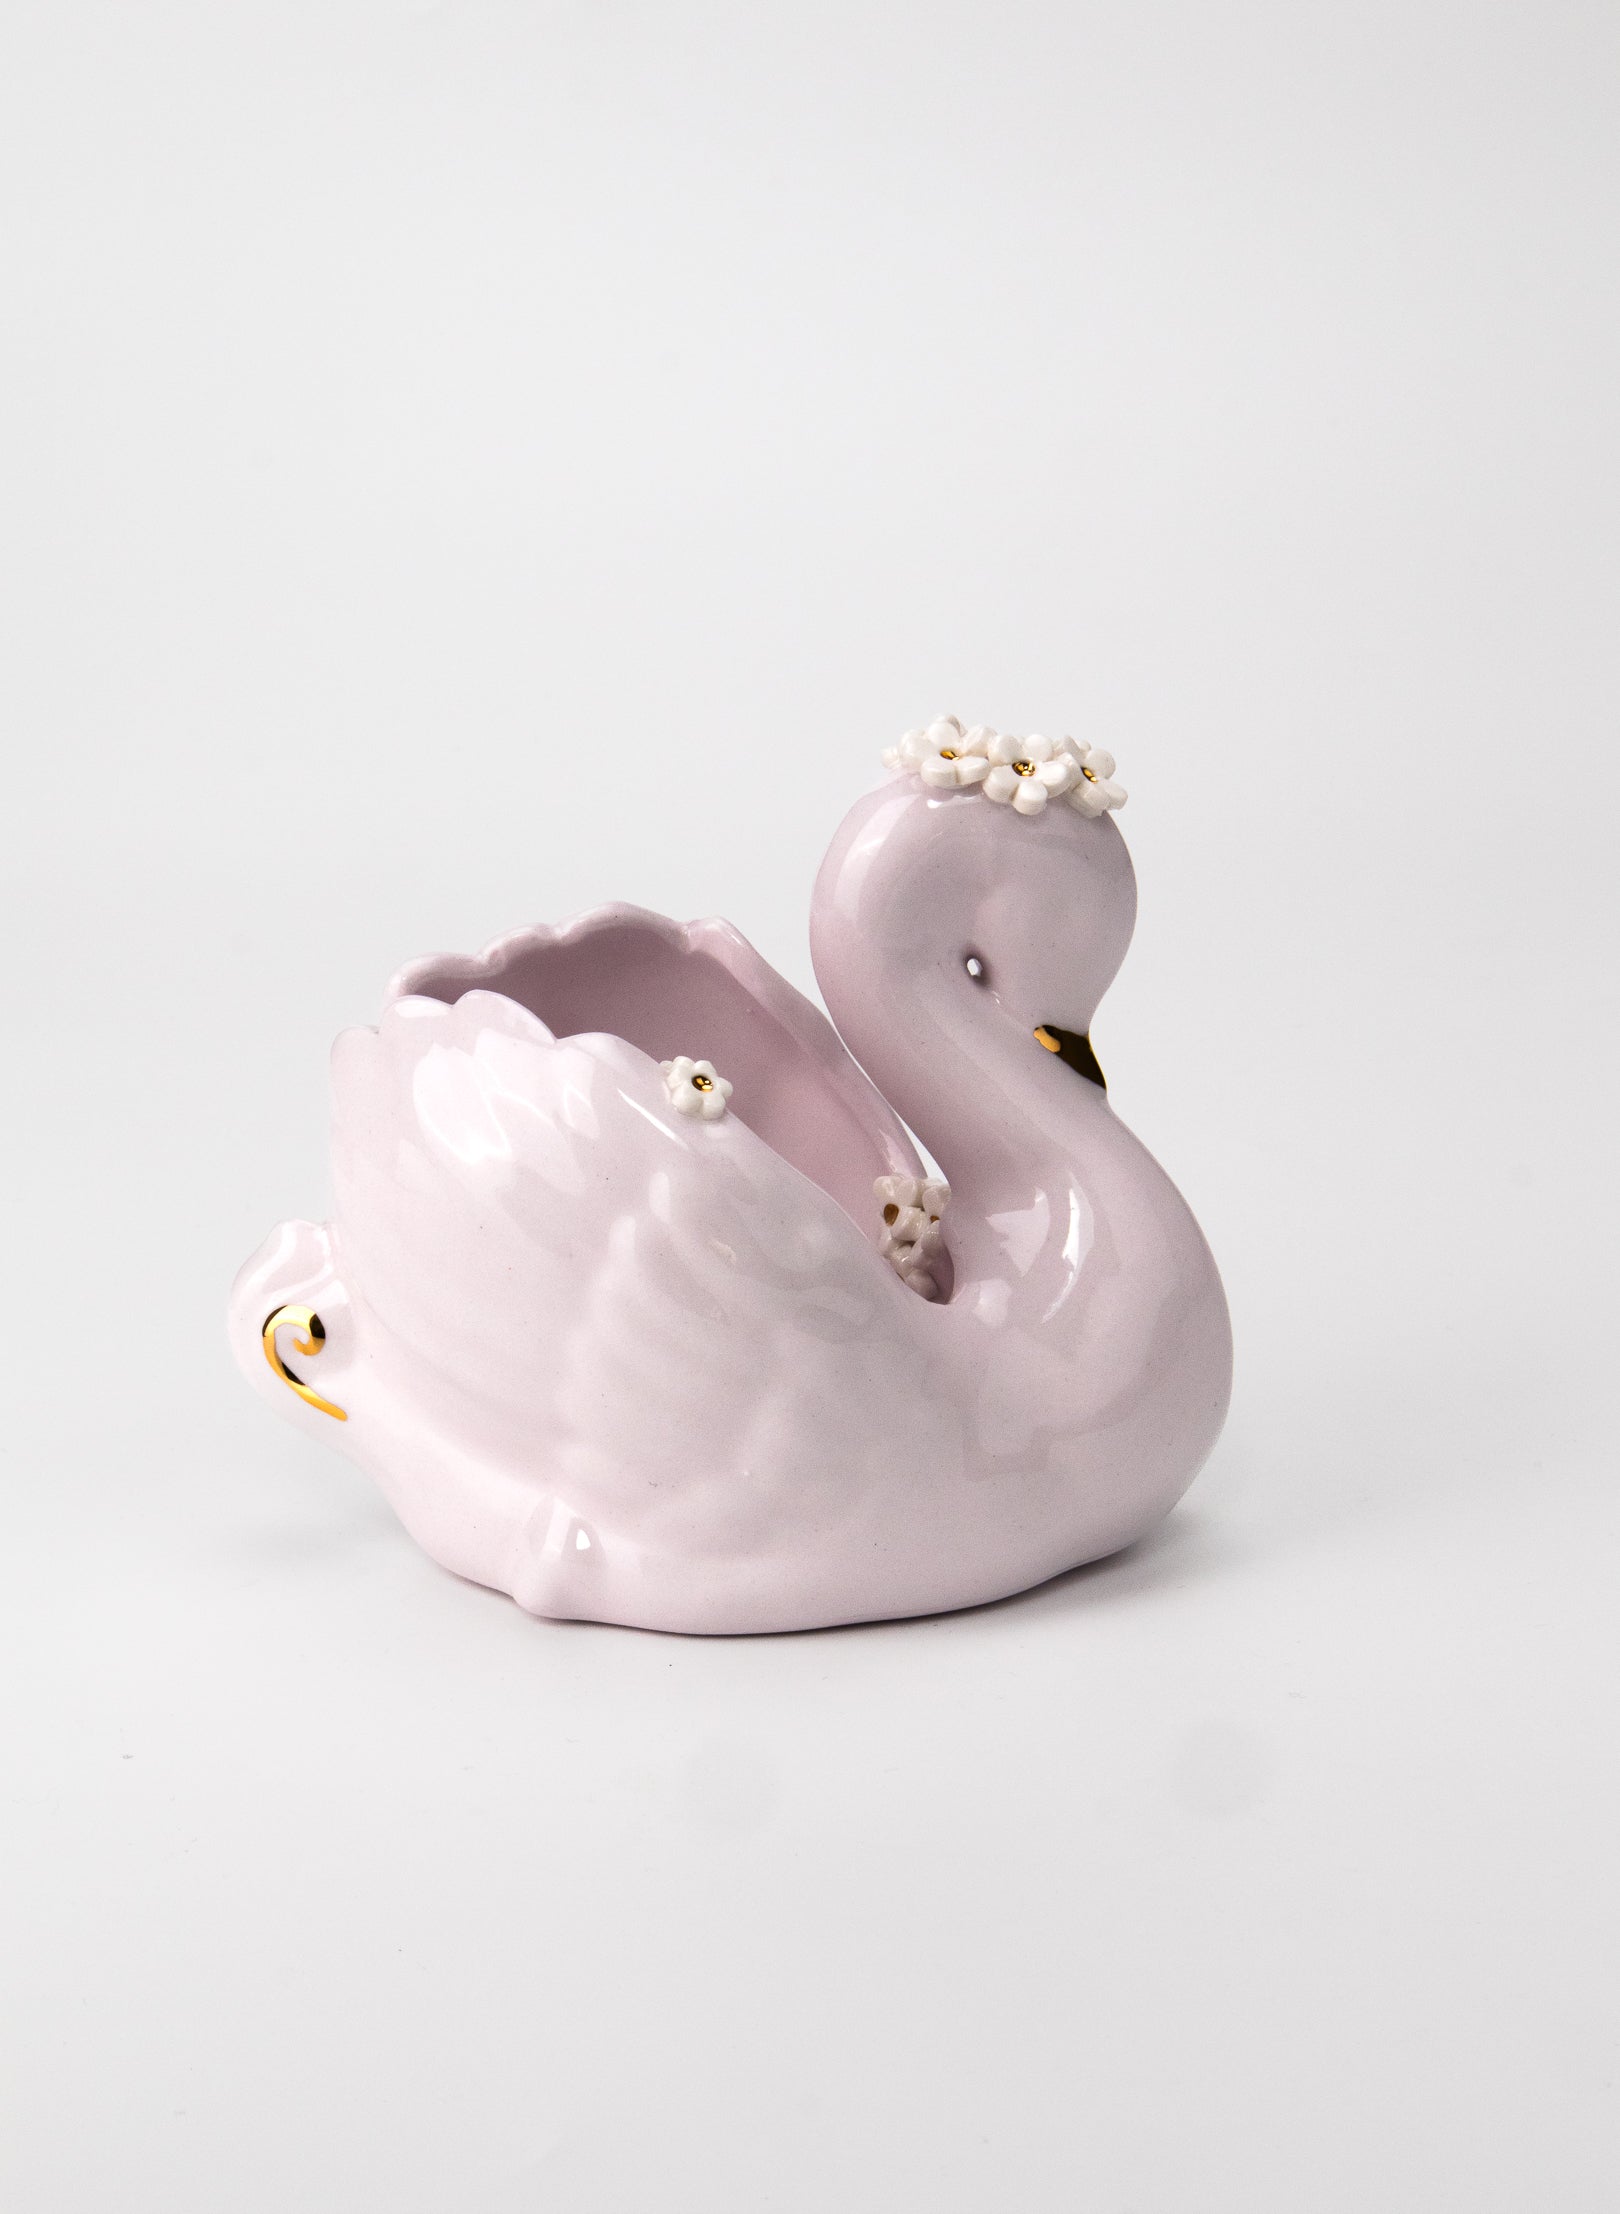 Medium Light Pastel Pink Swan with Gold and White Flowers